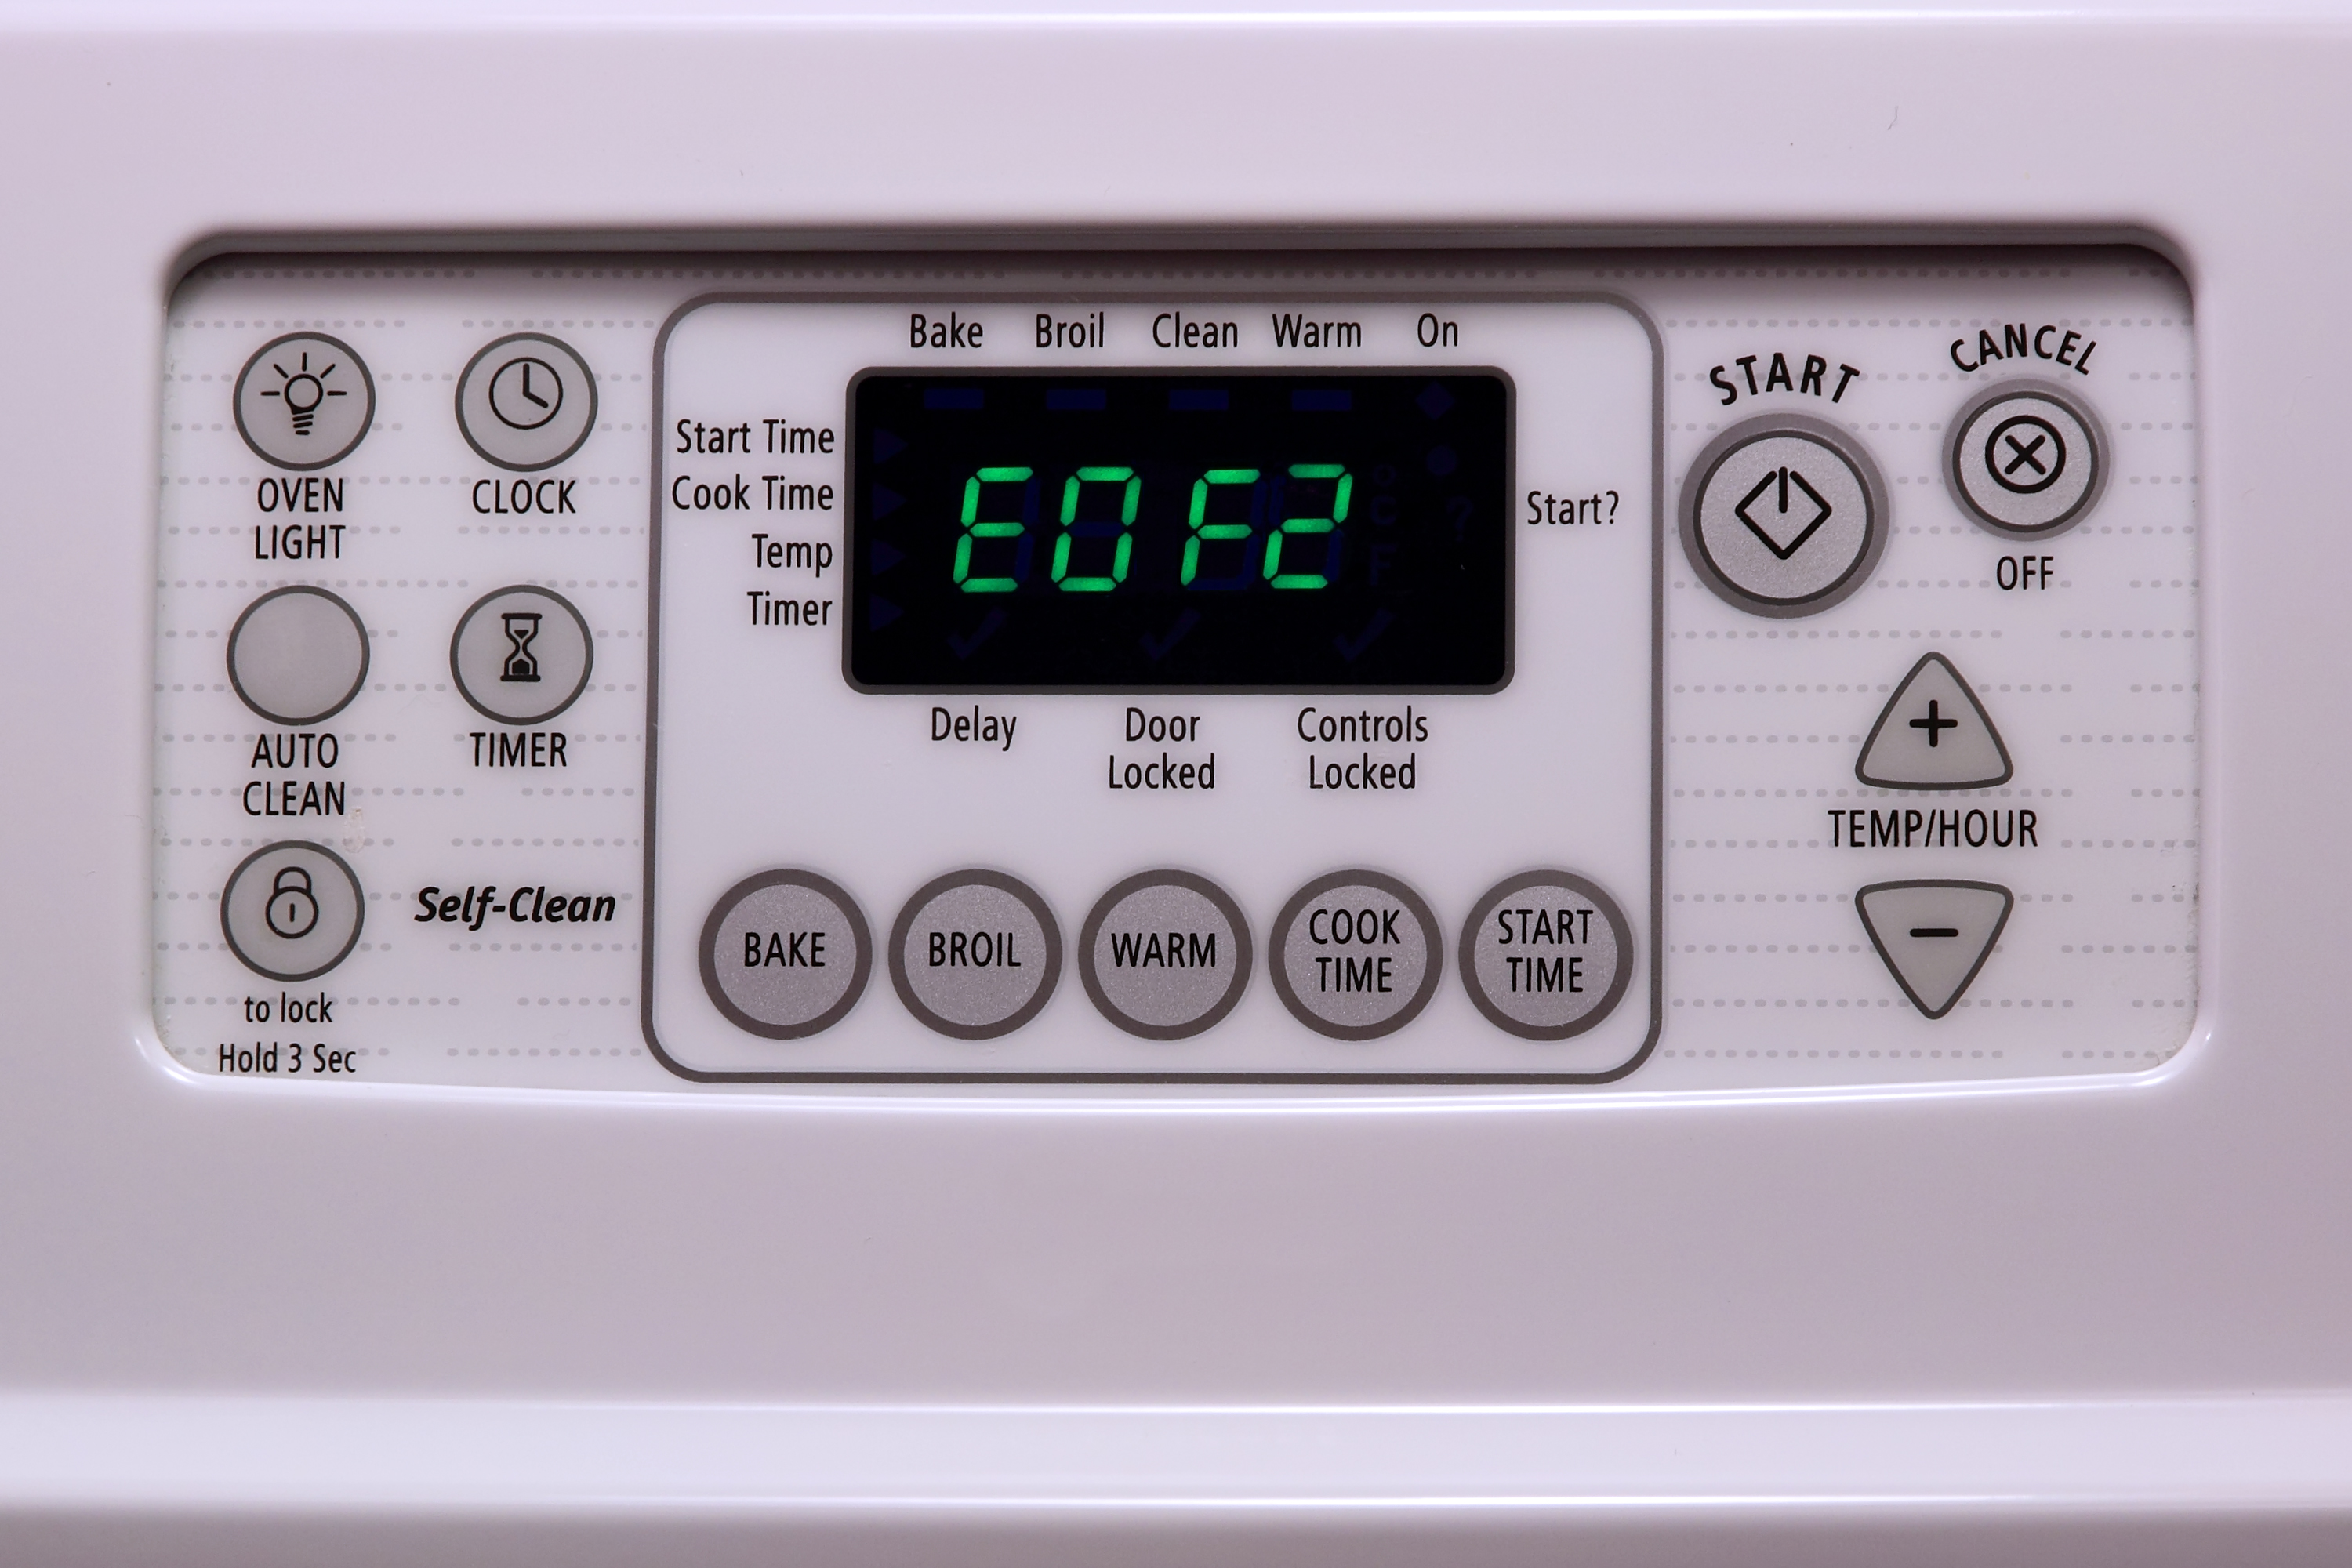 Fix The Eo F2 Code On A Kenmore Stove